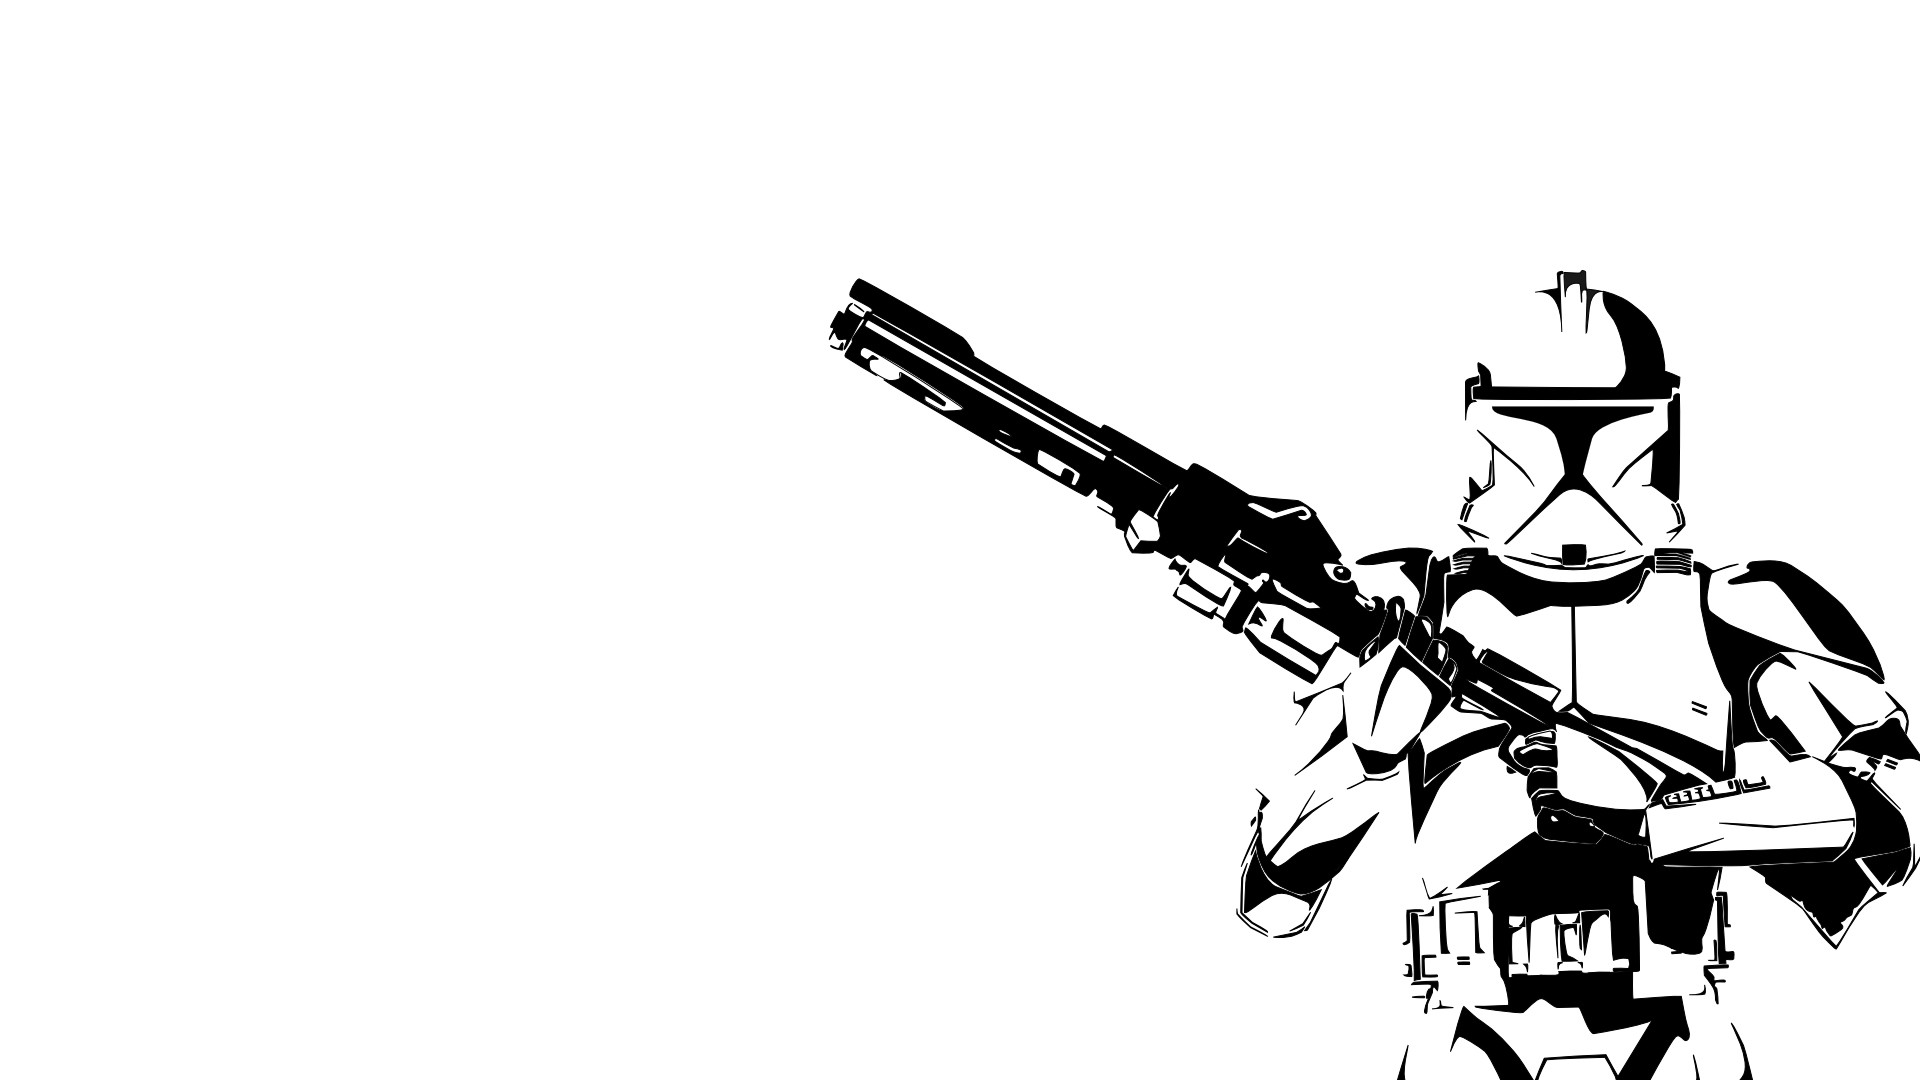 General 1920x1080 Star Wars clone trooper monochrome simple background science fiction white background